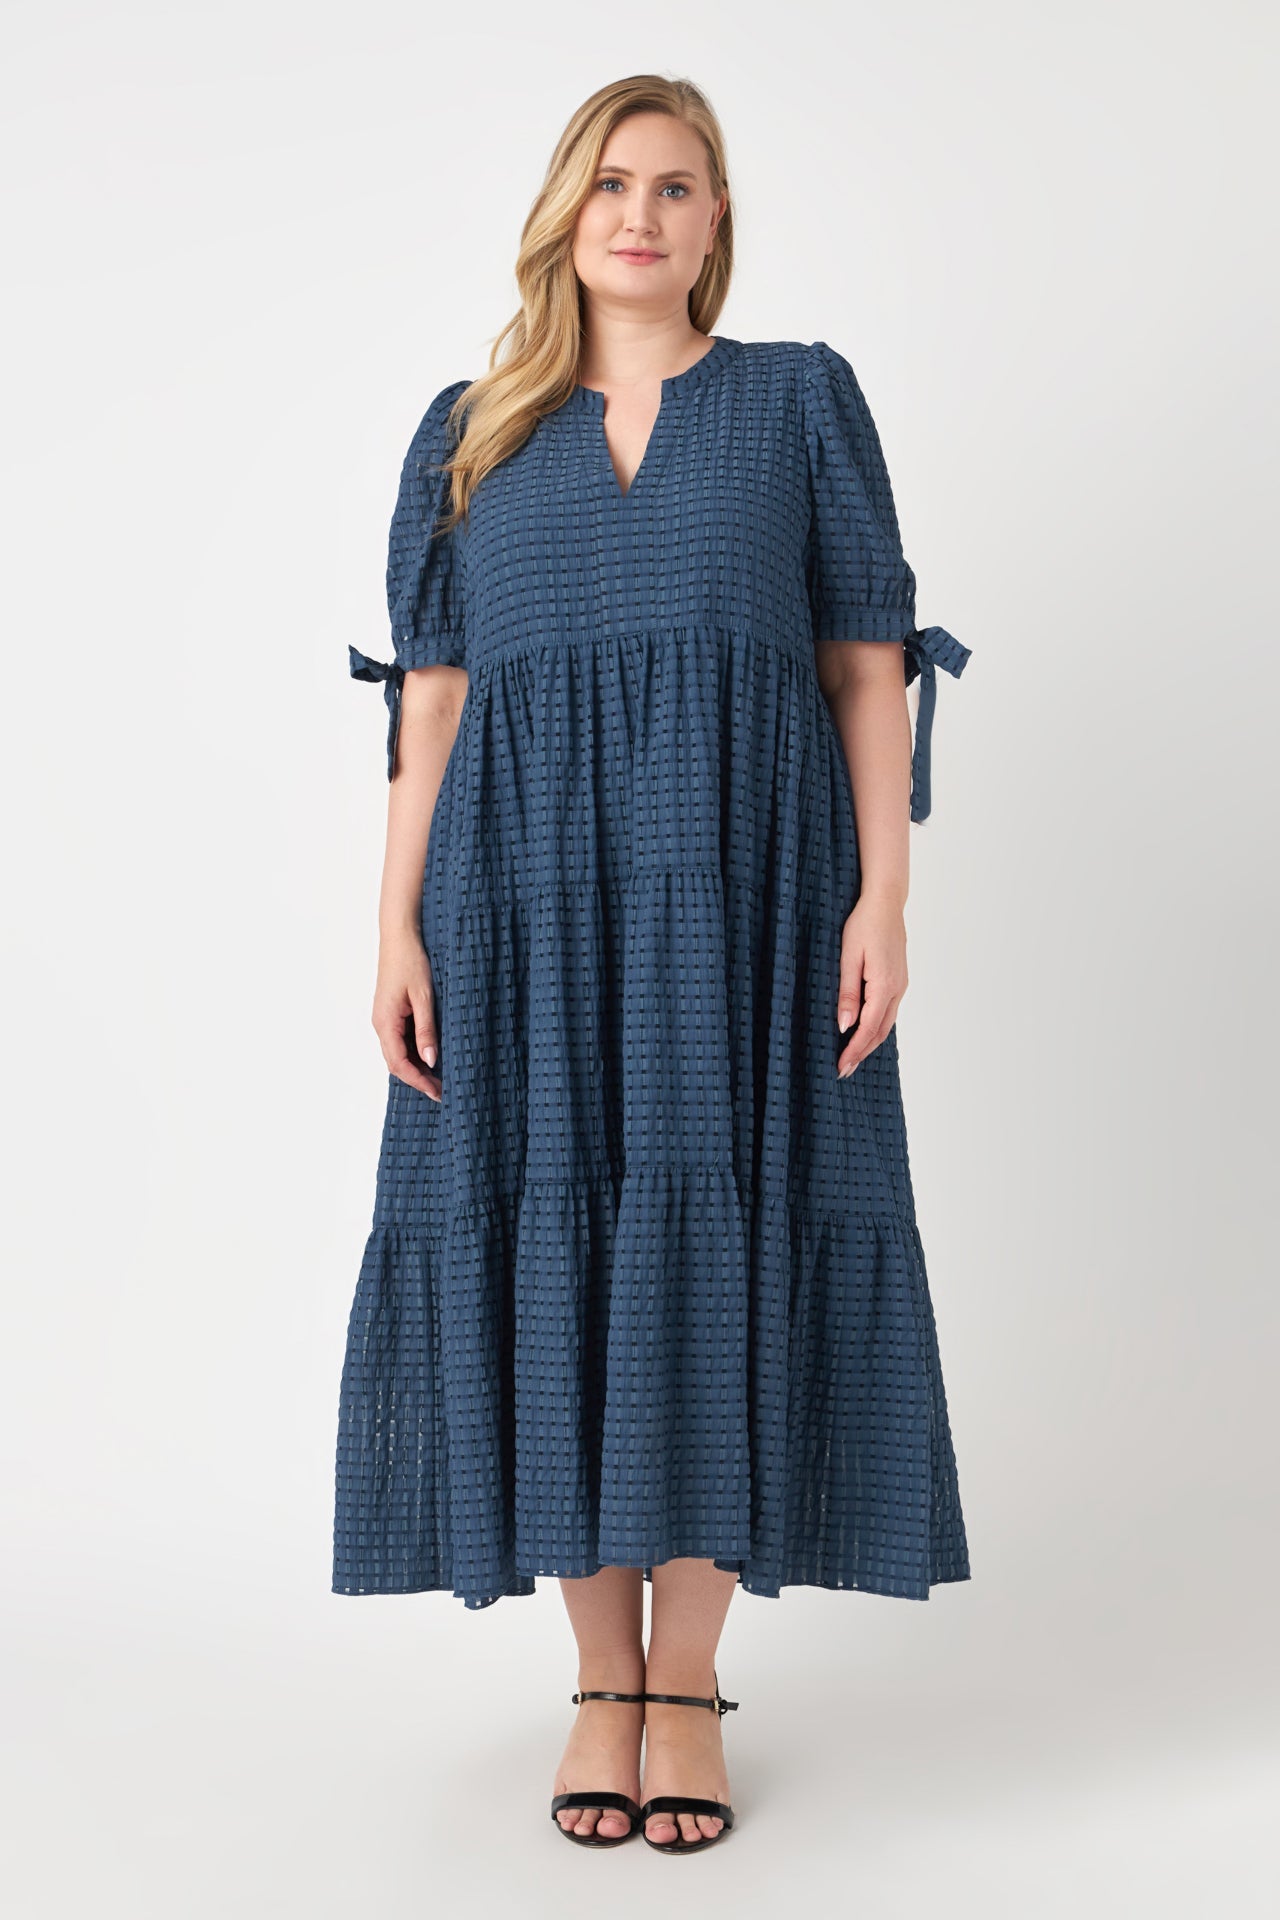 ENGLISH FACTORY-Gingham Tiered Midi Dress with Bow Tie Sleeves-DRESSES available at Objectrare